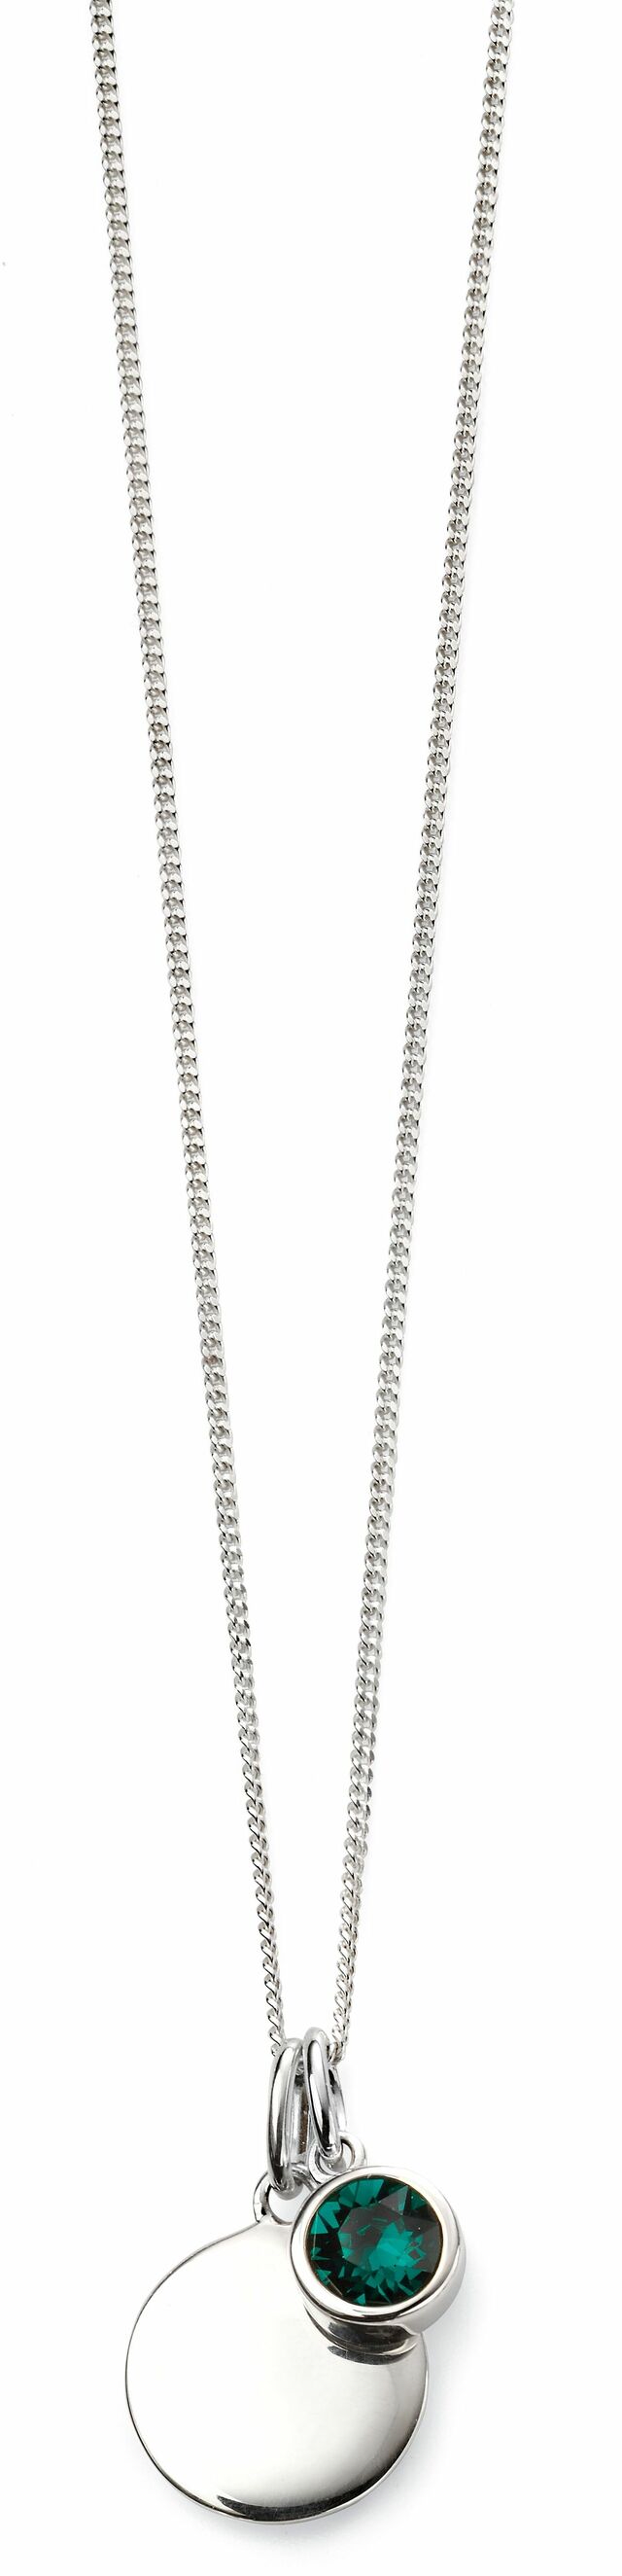 May Silver and Crystal Birthstone Necklace - NB1002 - Hallmark Jewellers Formby & The Jewellers Bench Widnes